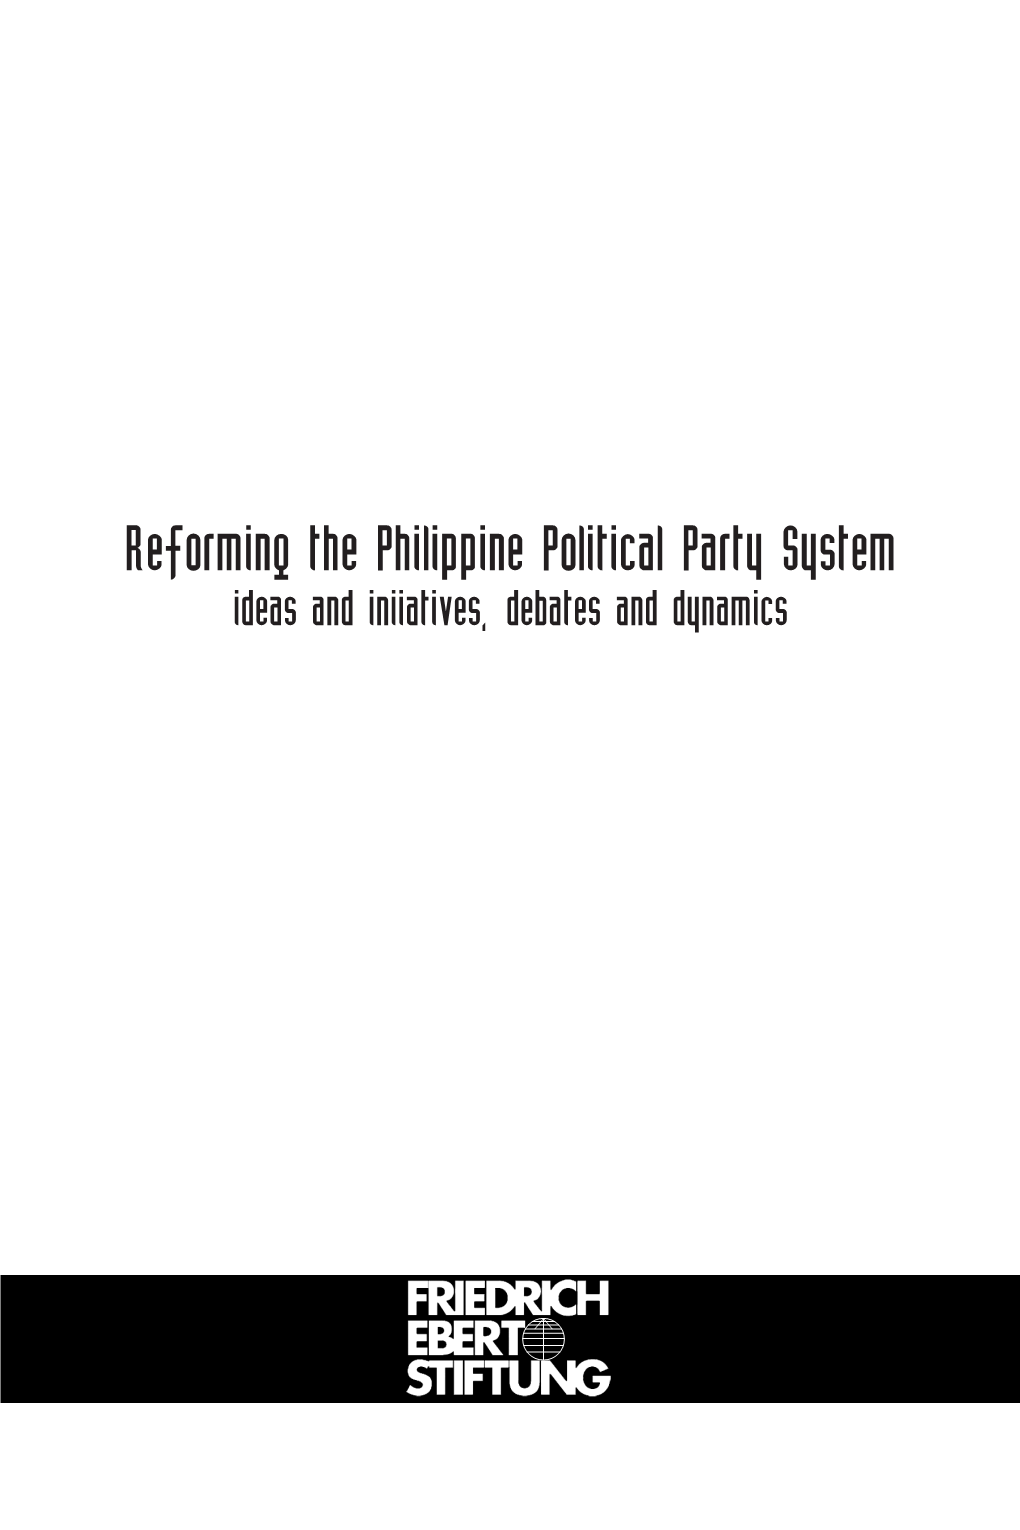 Reforming the Philippine Political Party System Ideas and Iniiatives, Debates and Dynamics Copyright 2009